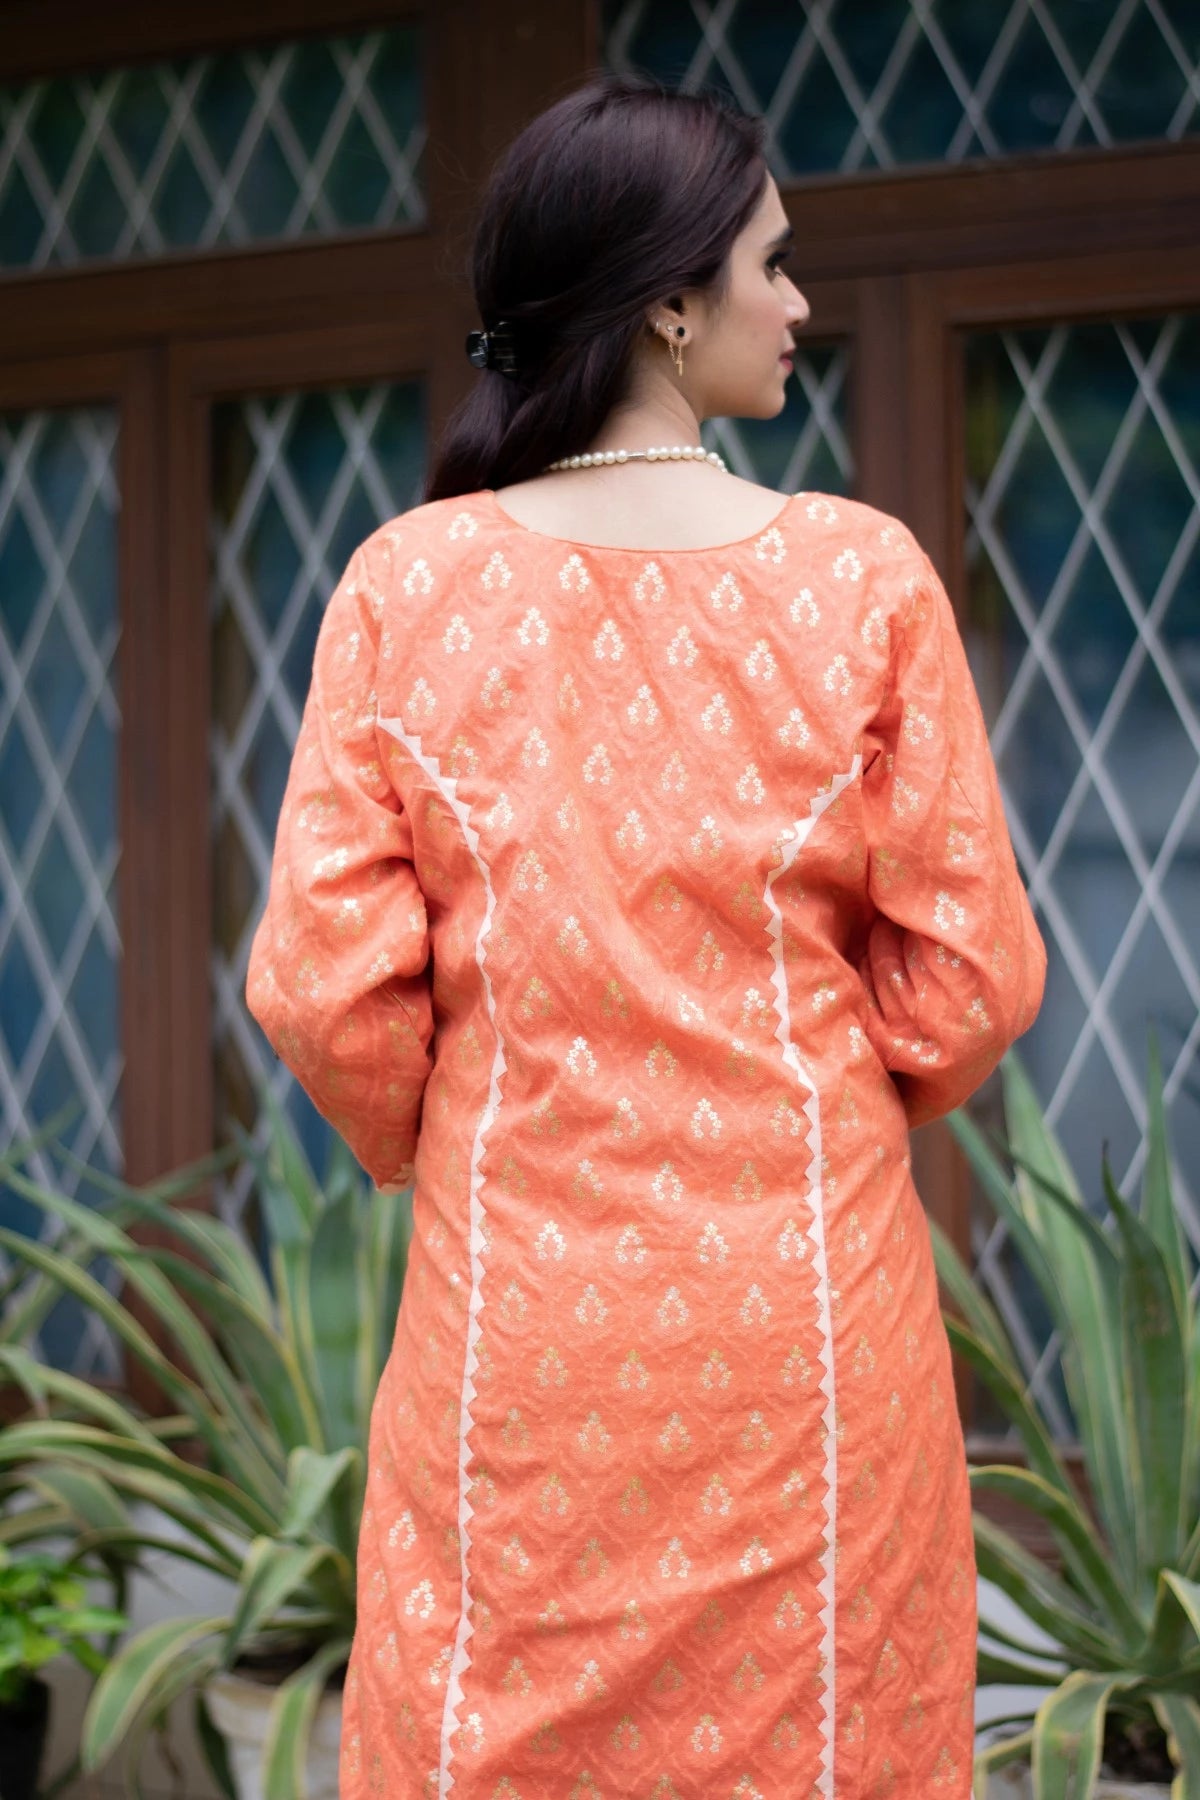 A stunning ethnic ensemble of an orange silk kurta and trousers worn by a woman